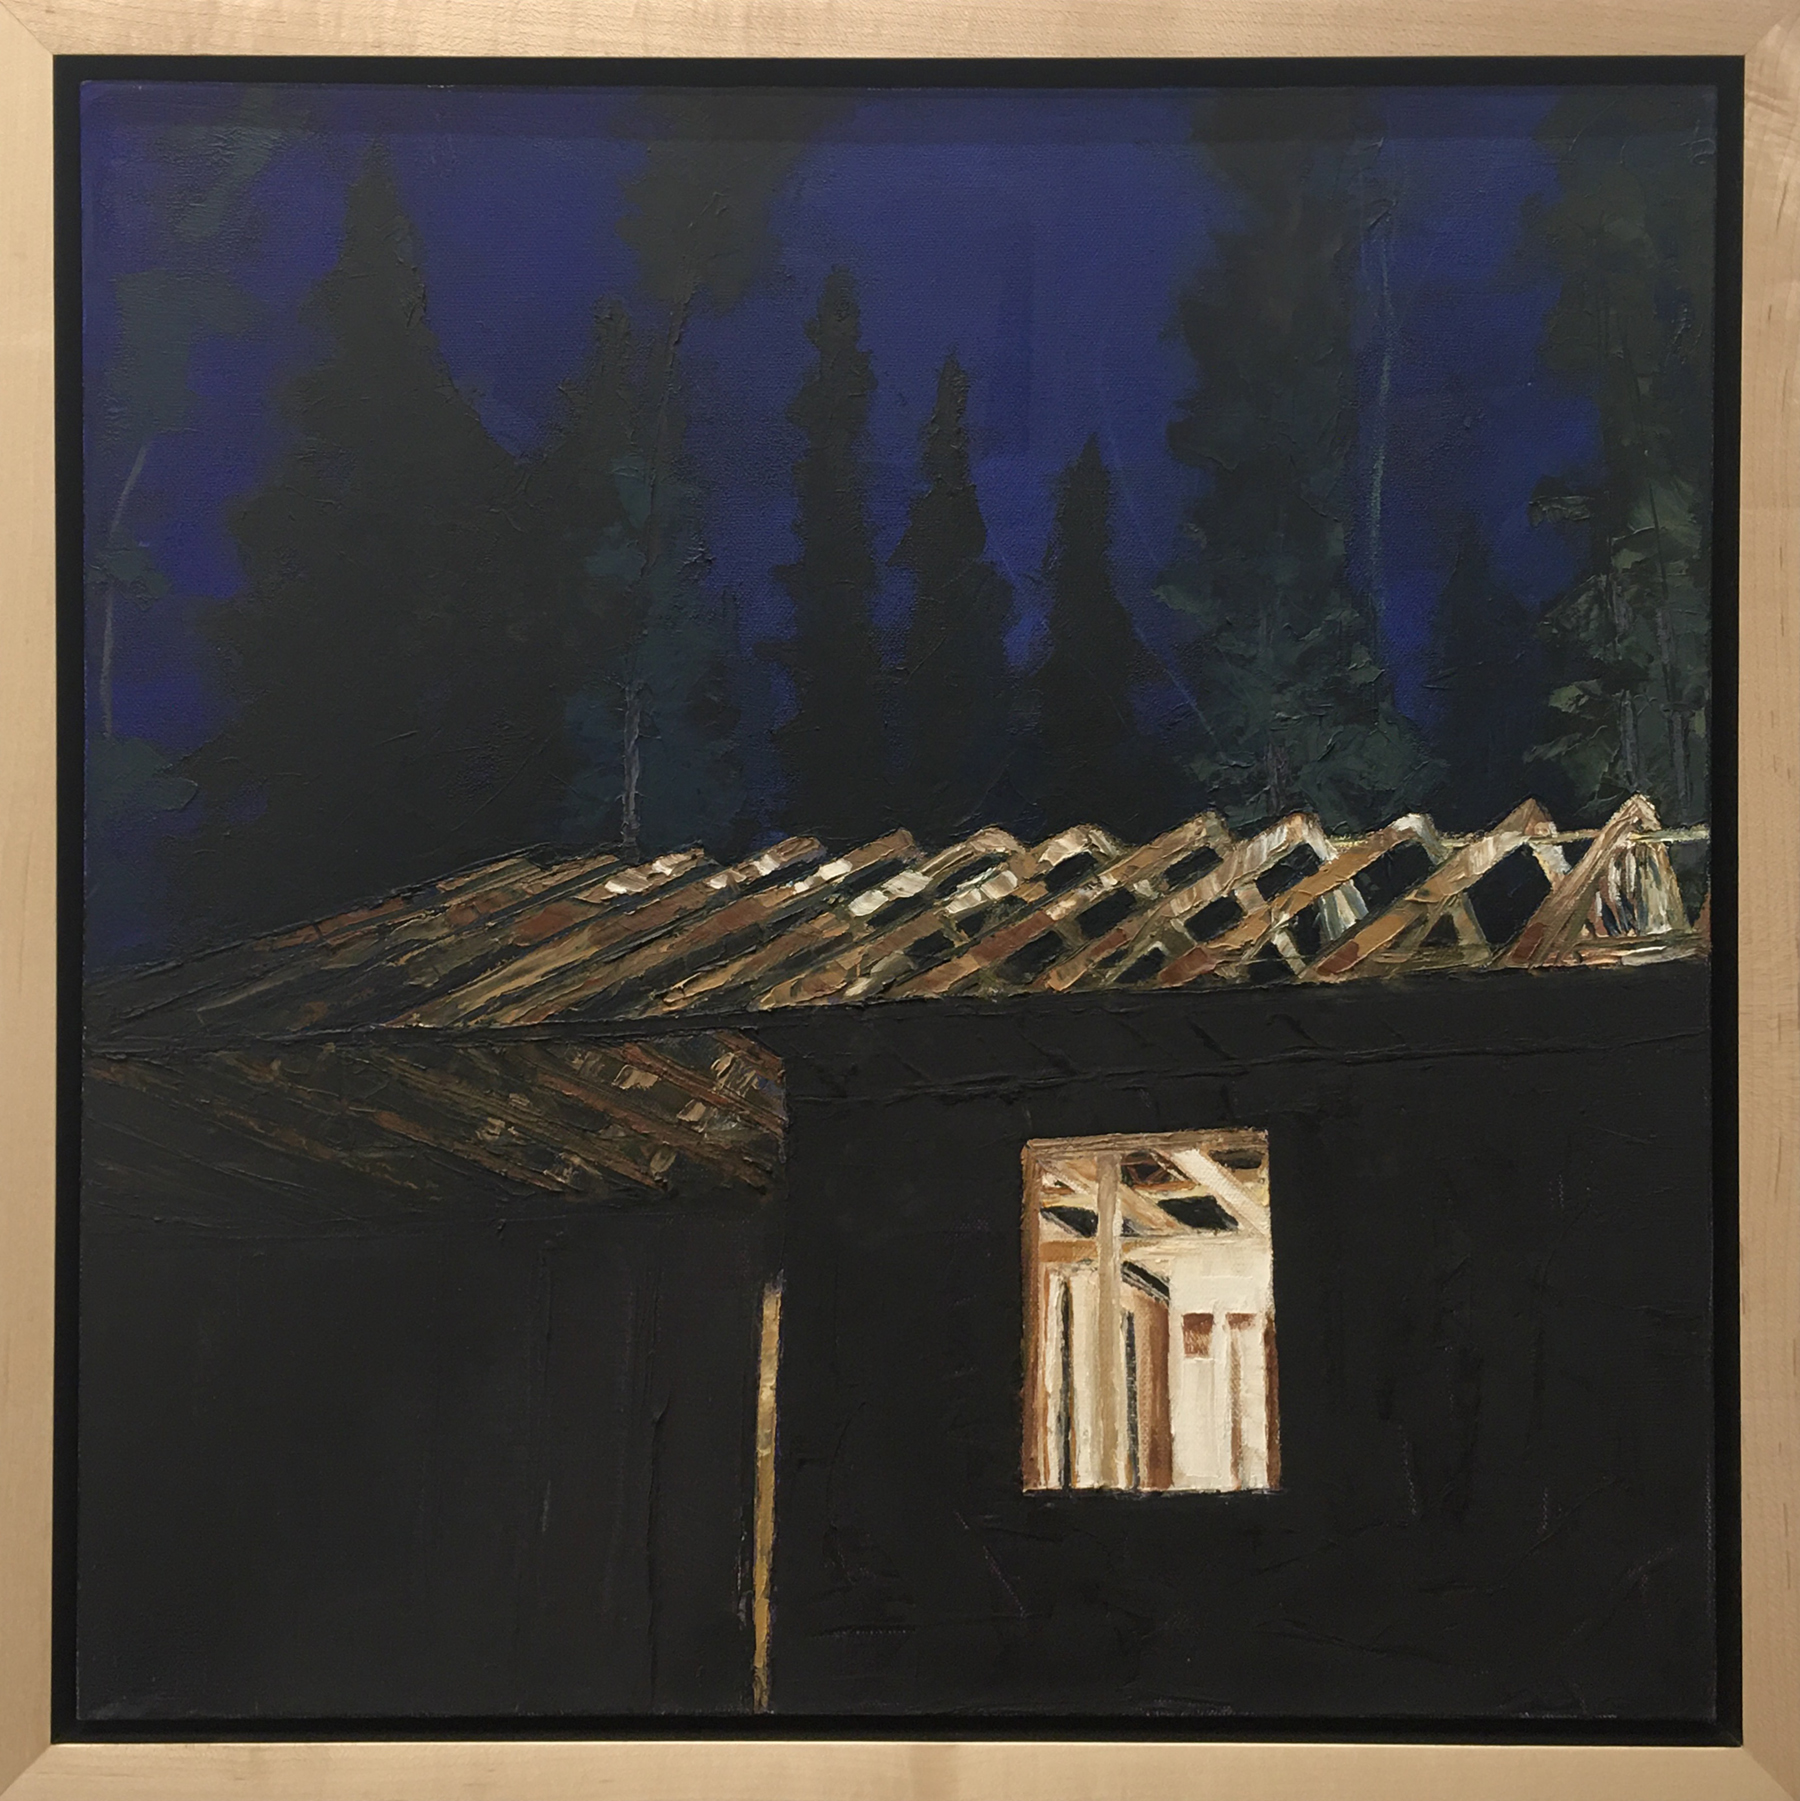 A frame of a house at night lit by an interior light. Photo courtesy of Allison Juneau